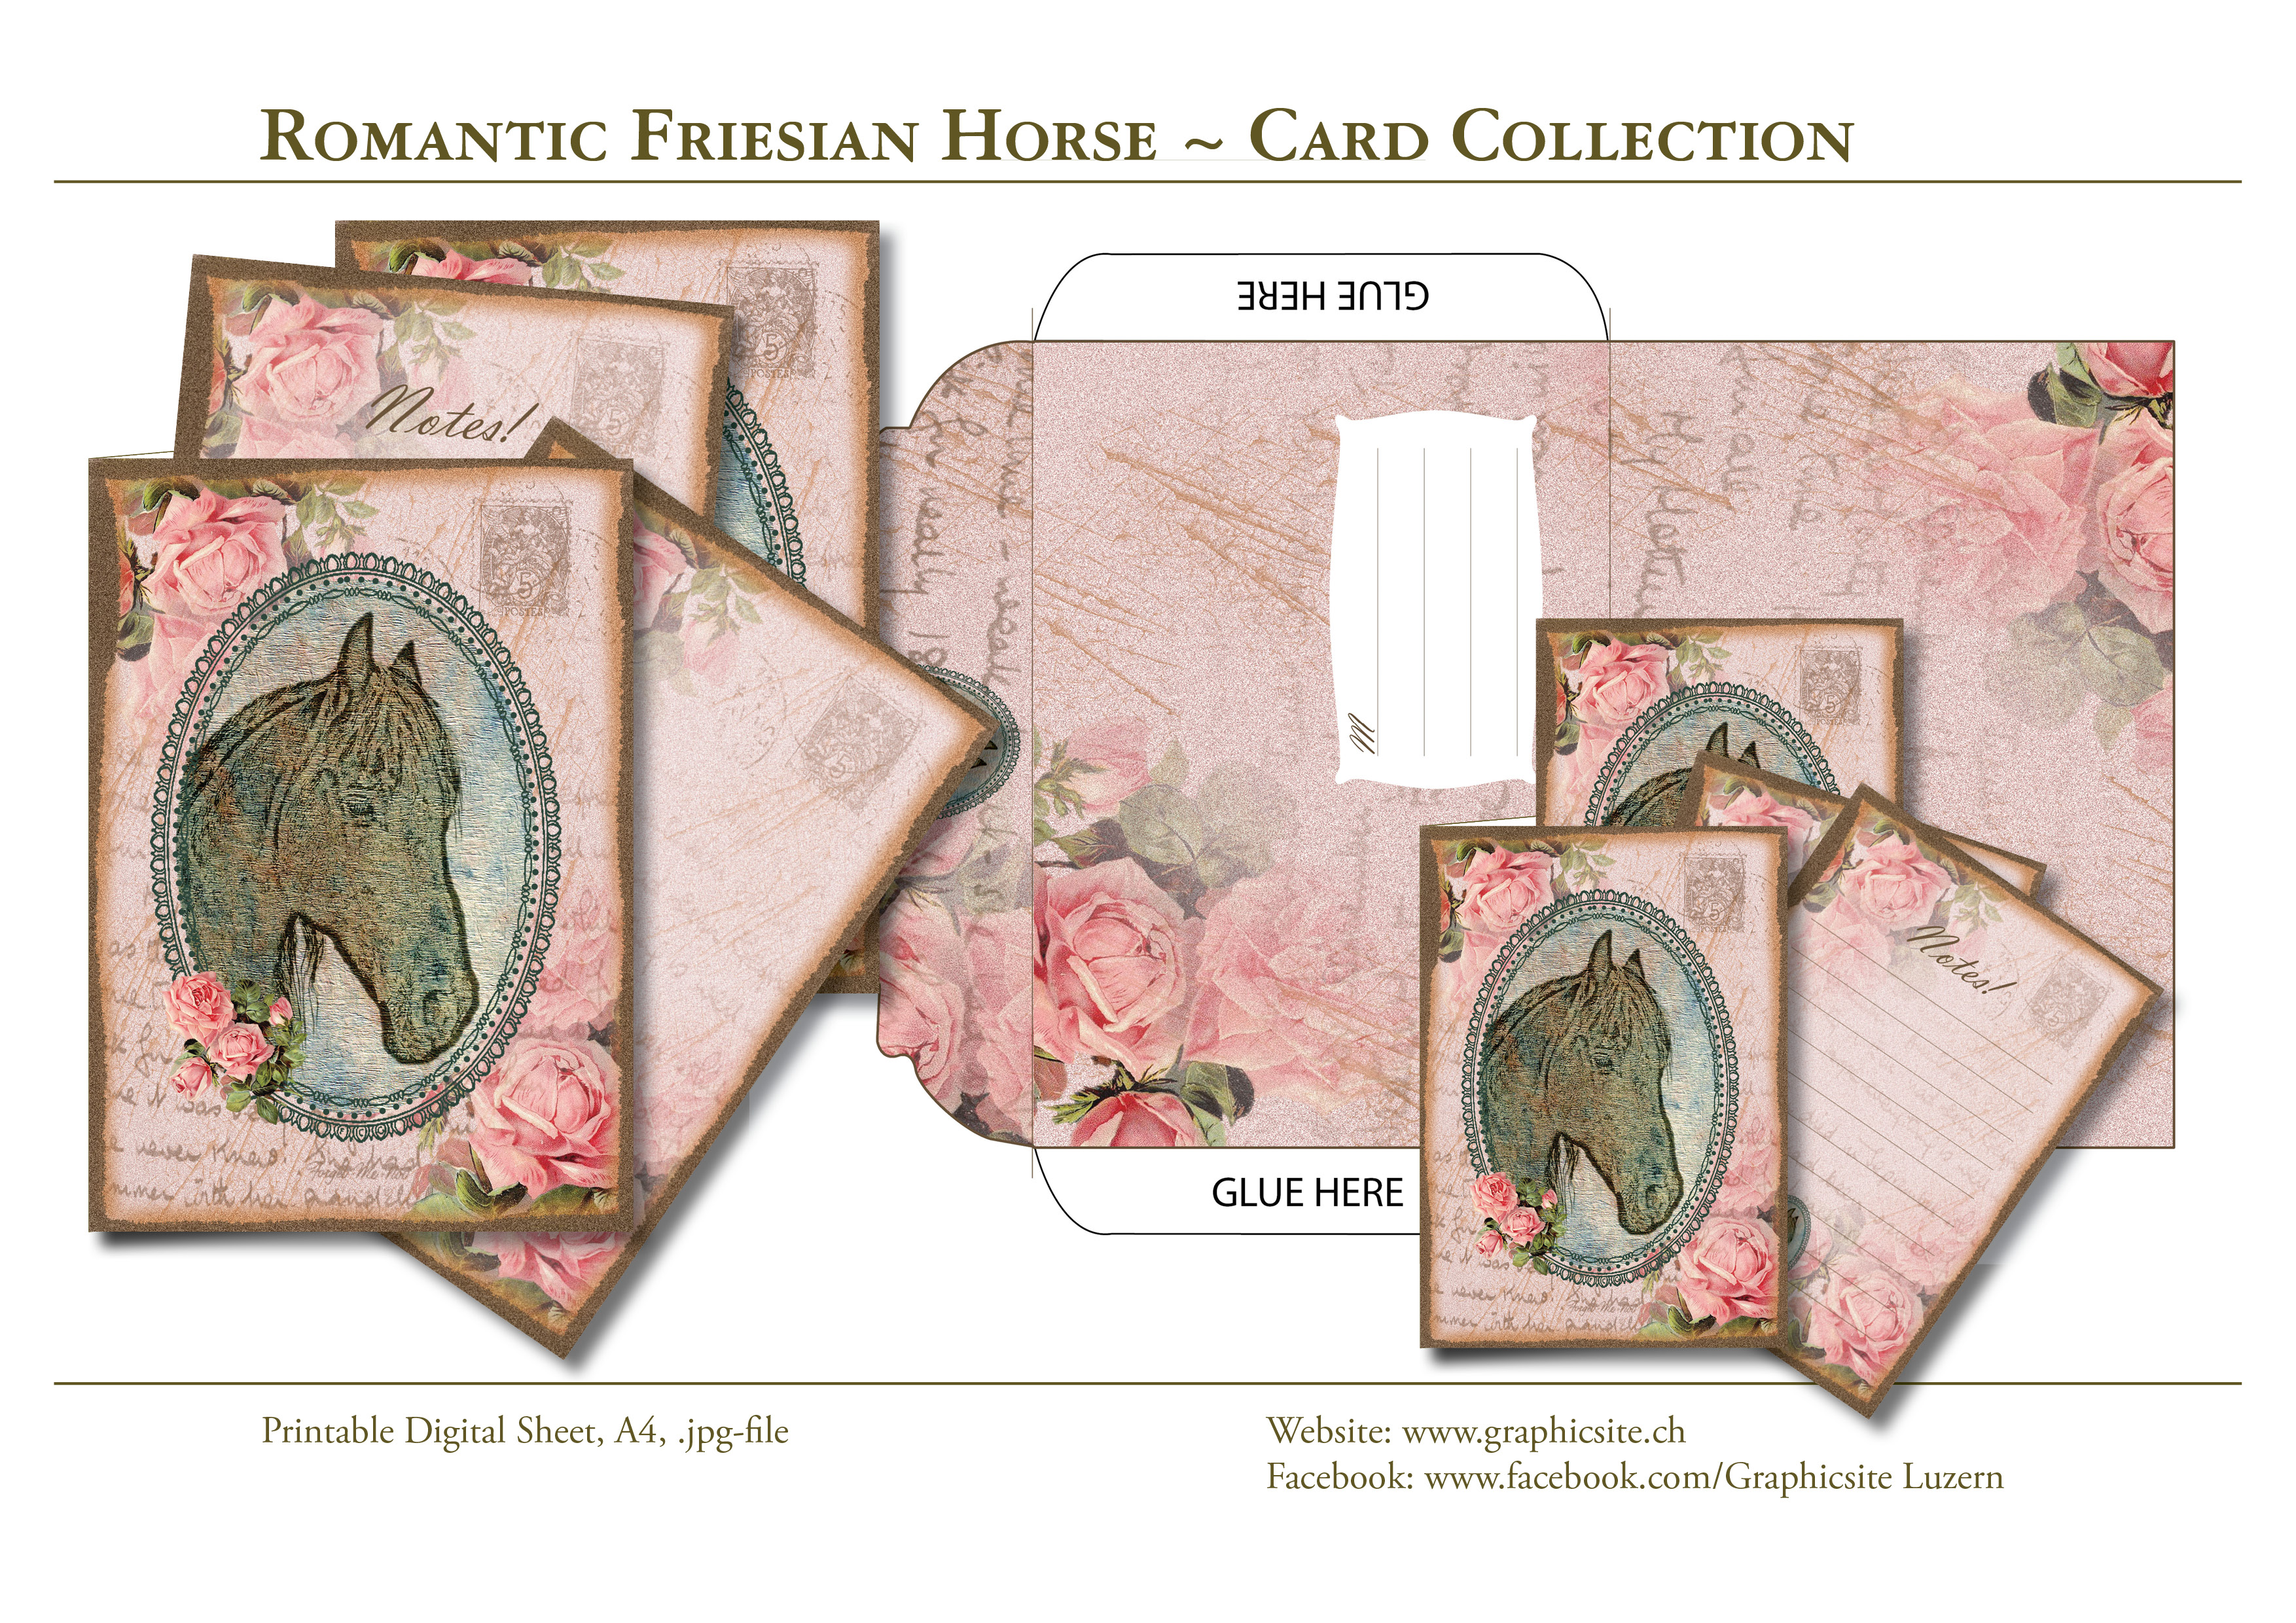 Printable Digital Sheets - DIN A Formats - Romantic Friesian Horse - Card Collection - #cards, #greetingcards, #horse, #download, #graphicdesign, #luzern, #schweiz,